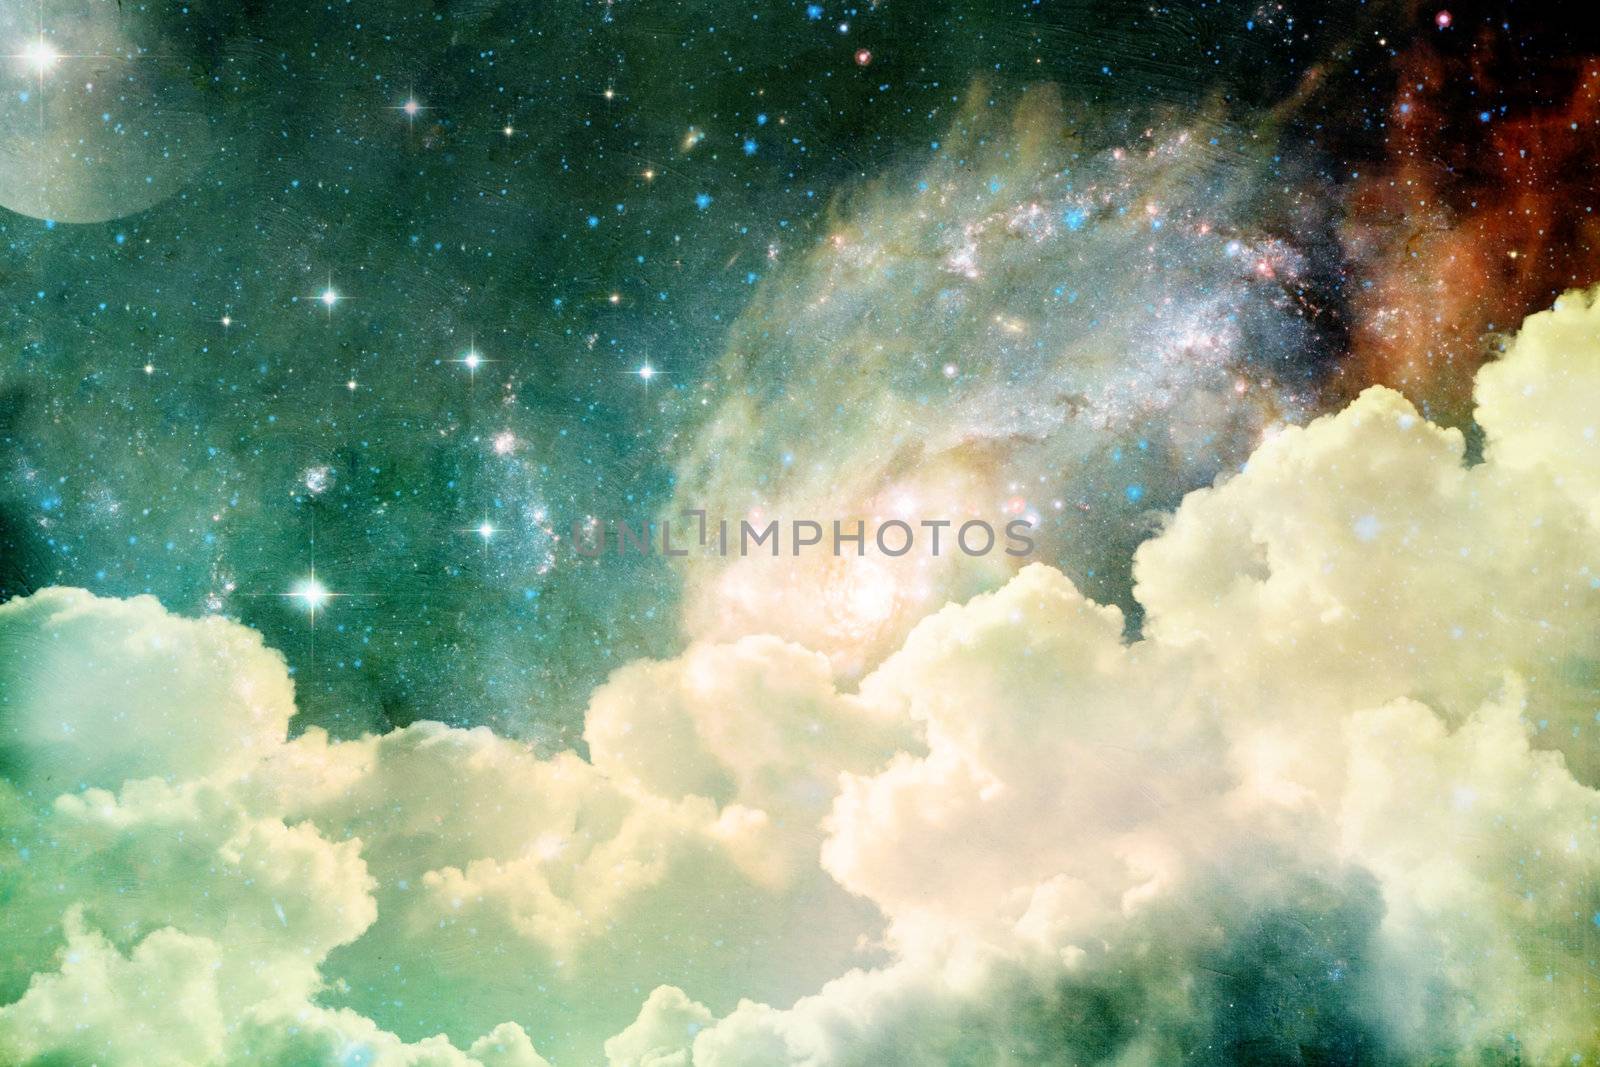 A photobased cloudscape with clouds, stars and moon with distant galaxies.